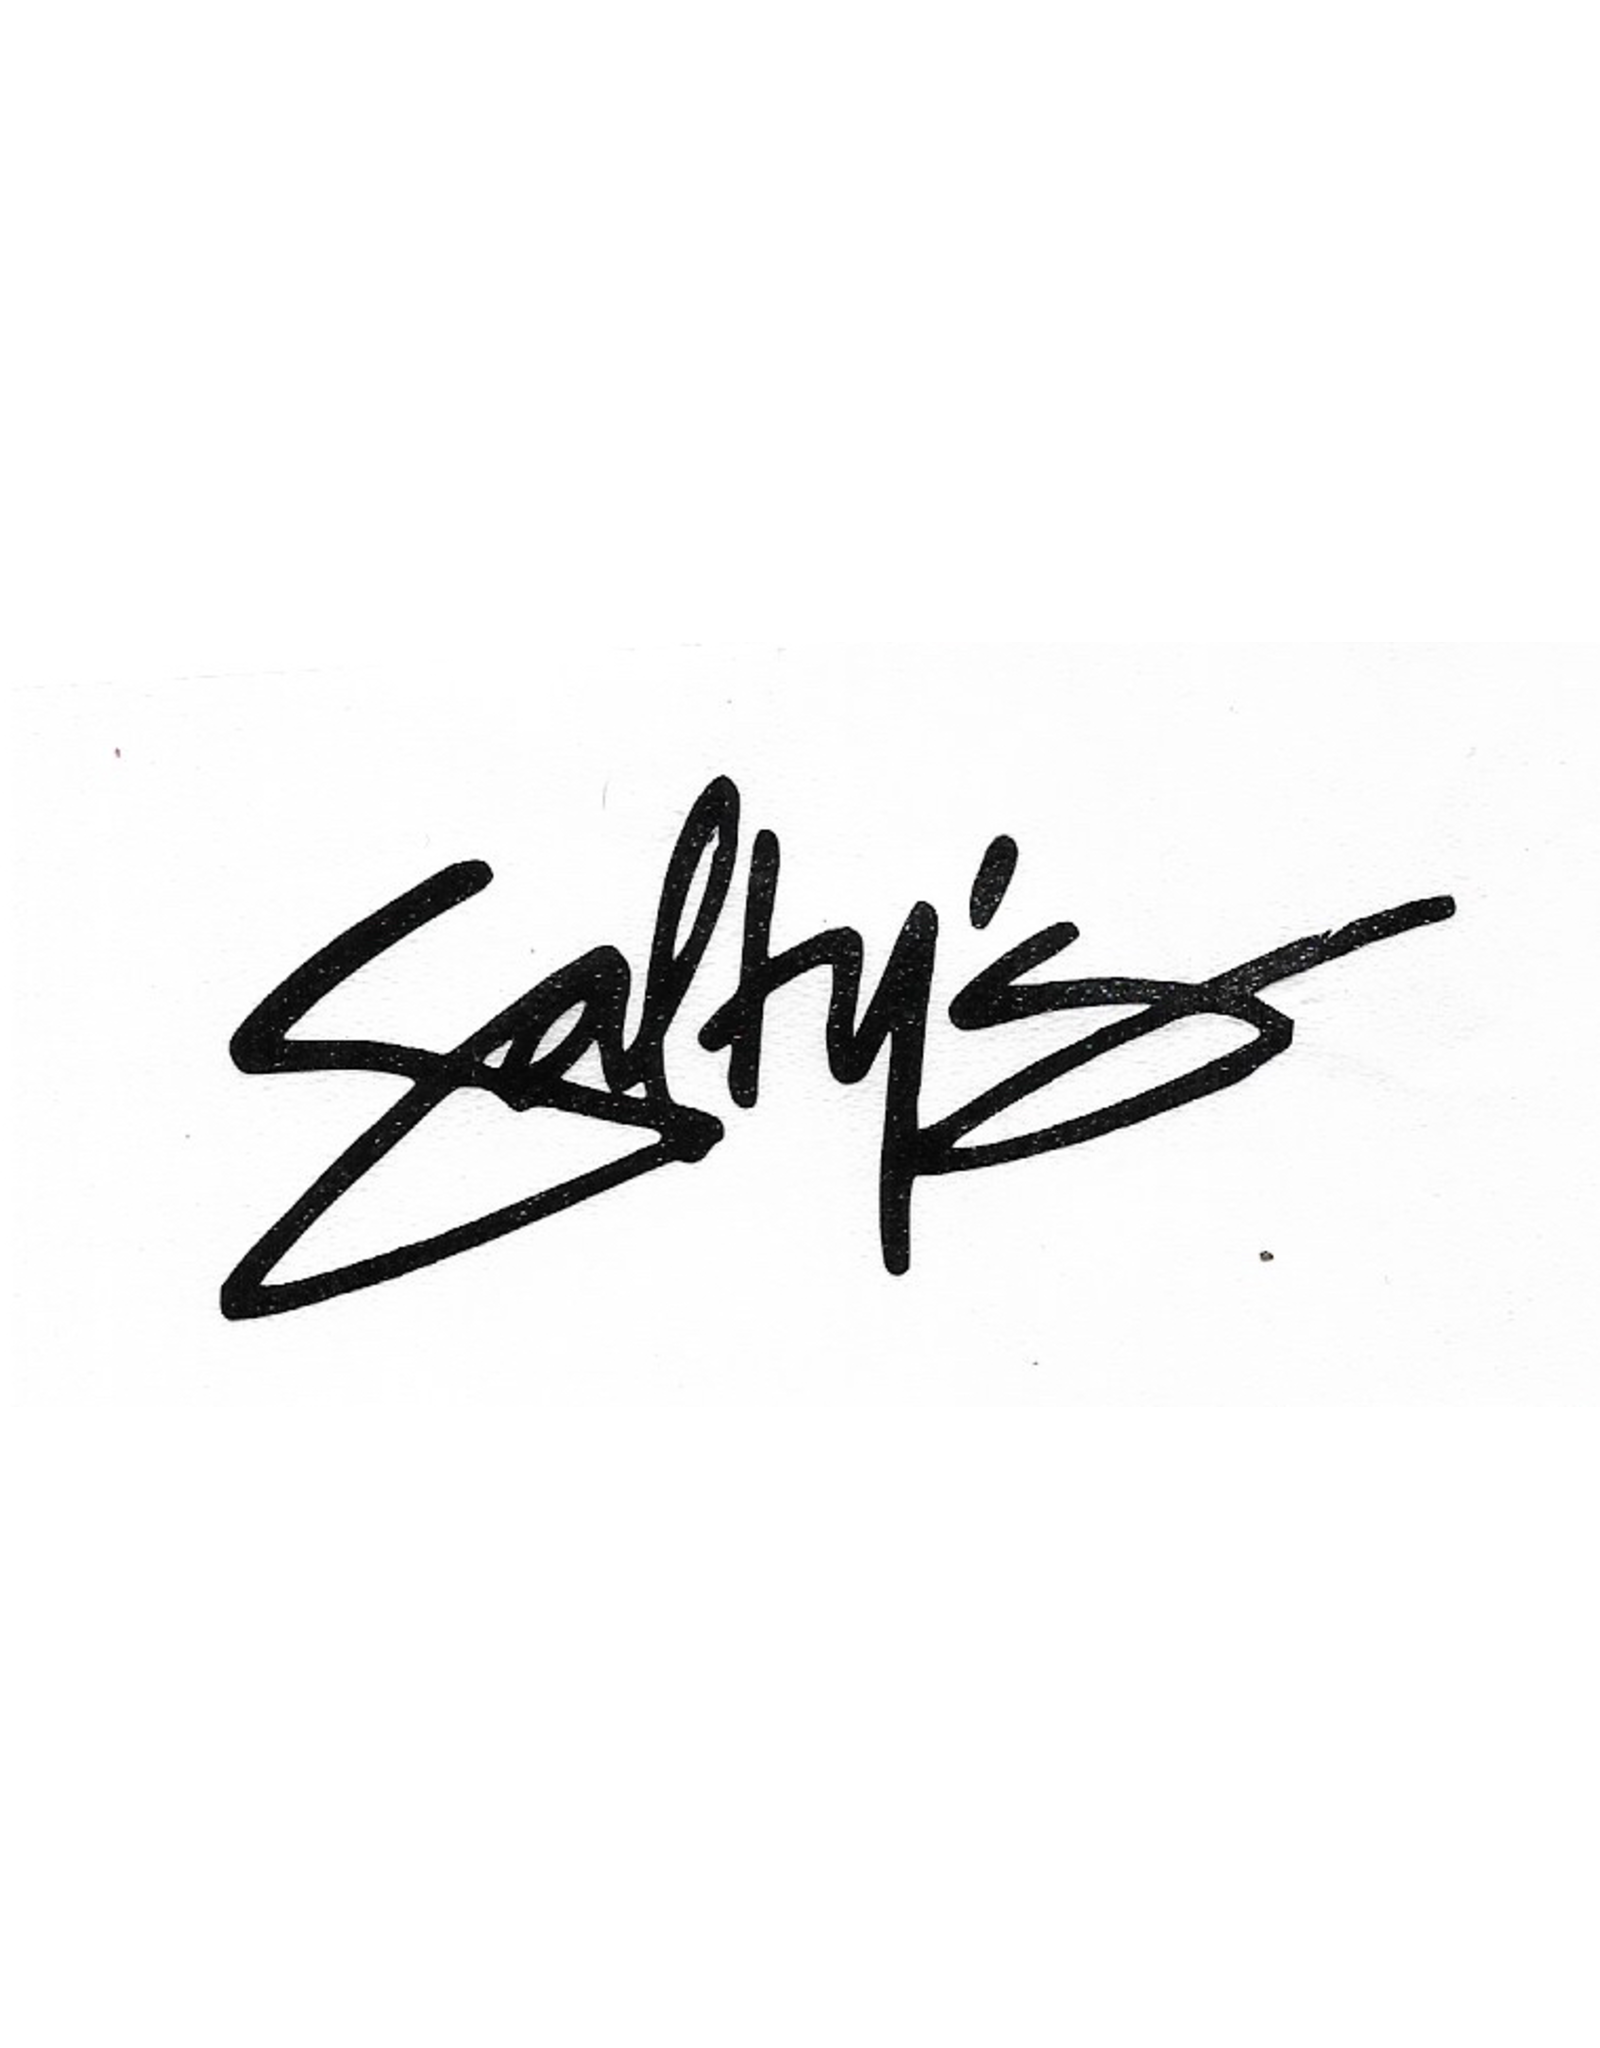 SALTY'S LOGO STICKERS SIMPLE LOGO STICKER- 3 INCHES